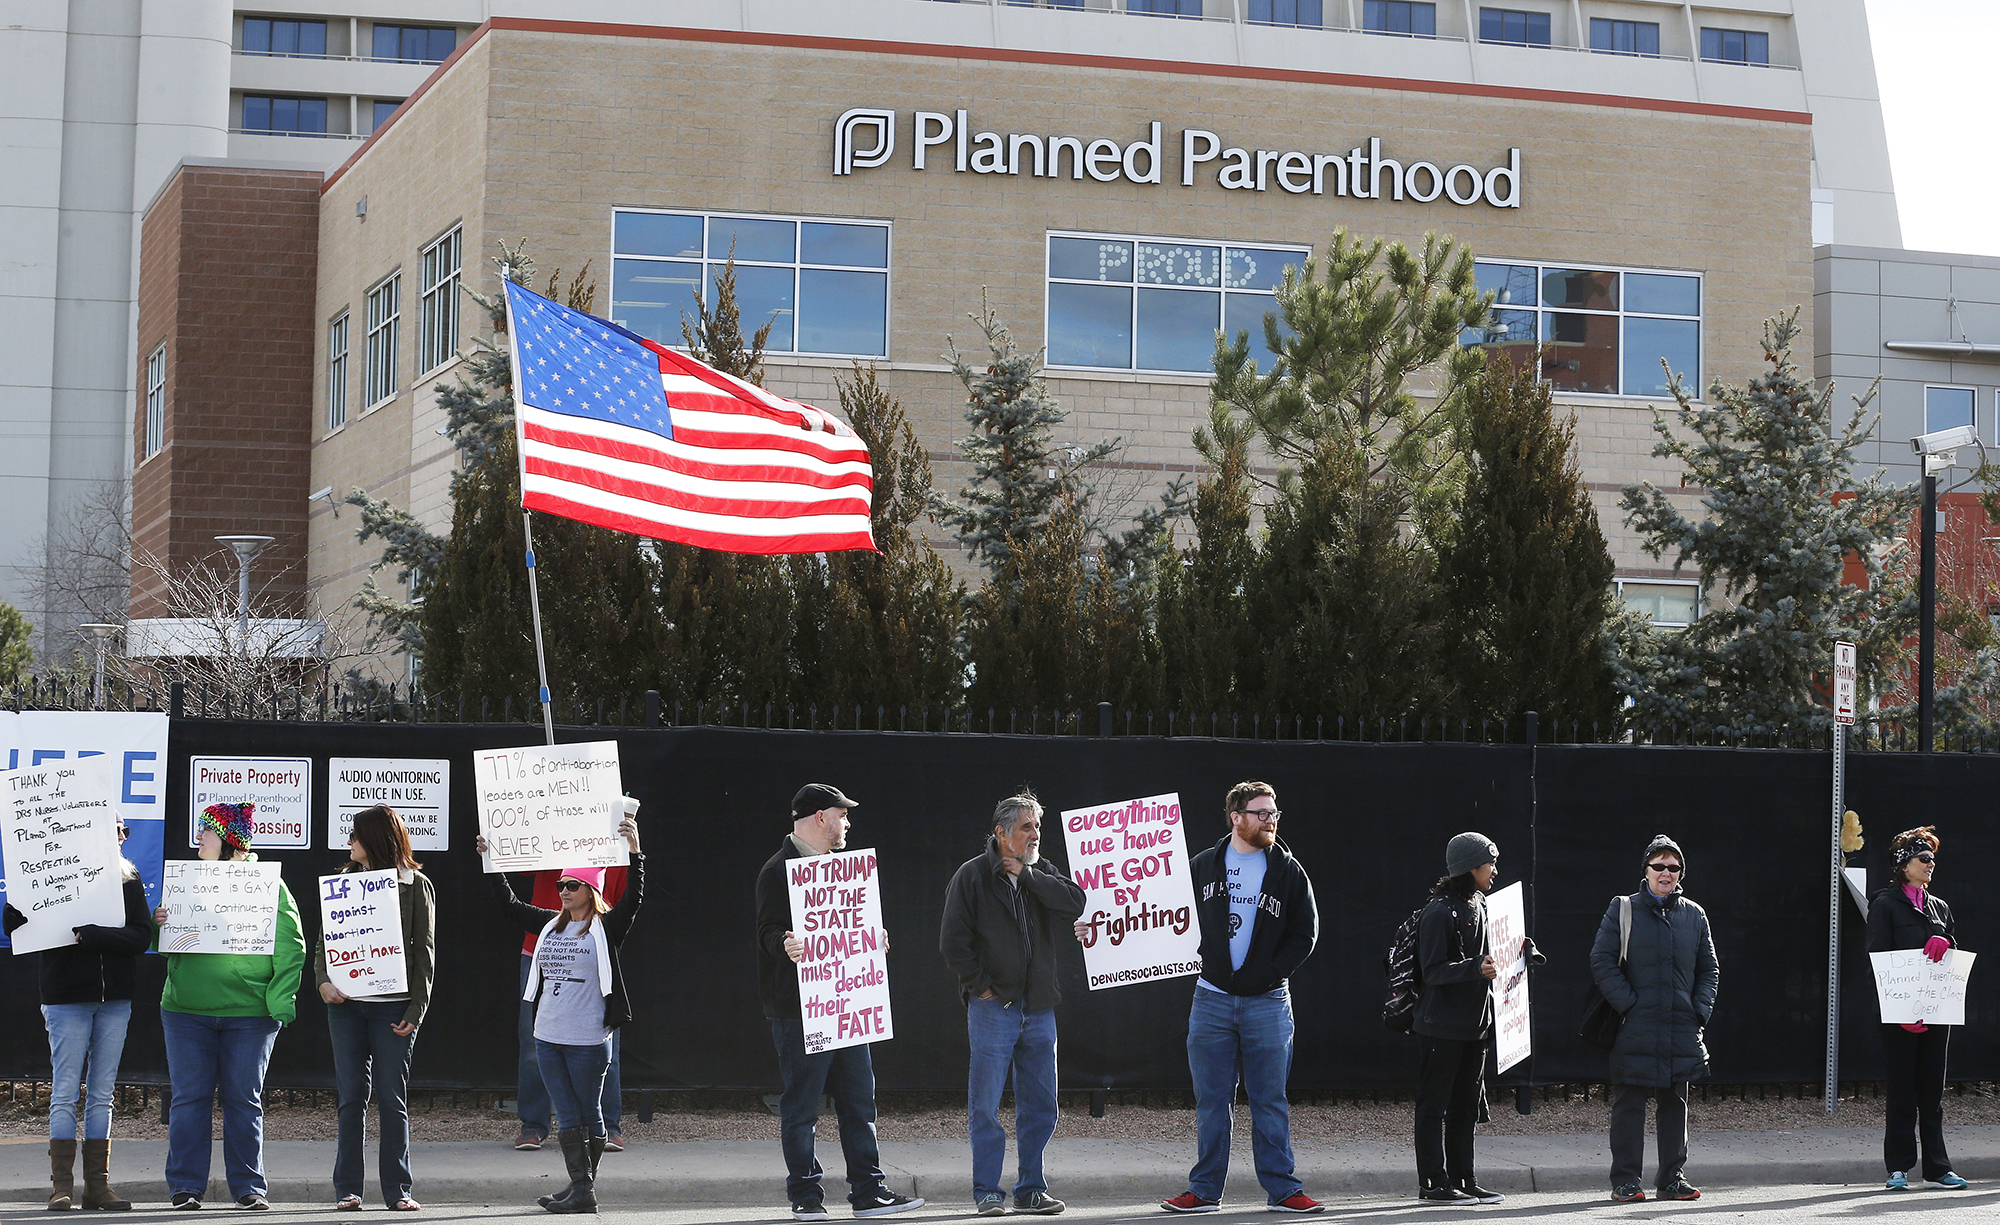 Pro-choice counter-protesters hold signs supporting a woman's right to choose abortion, as nearby anti-abortion activists held a rally in front of Planned Parenthood of the Rocky Mountains, in Denver, Colo., on Feb. 11, 2017. (Brennan Linsley—AP)